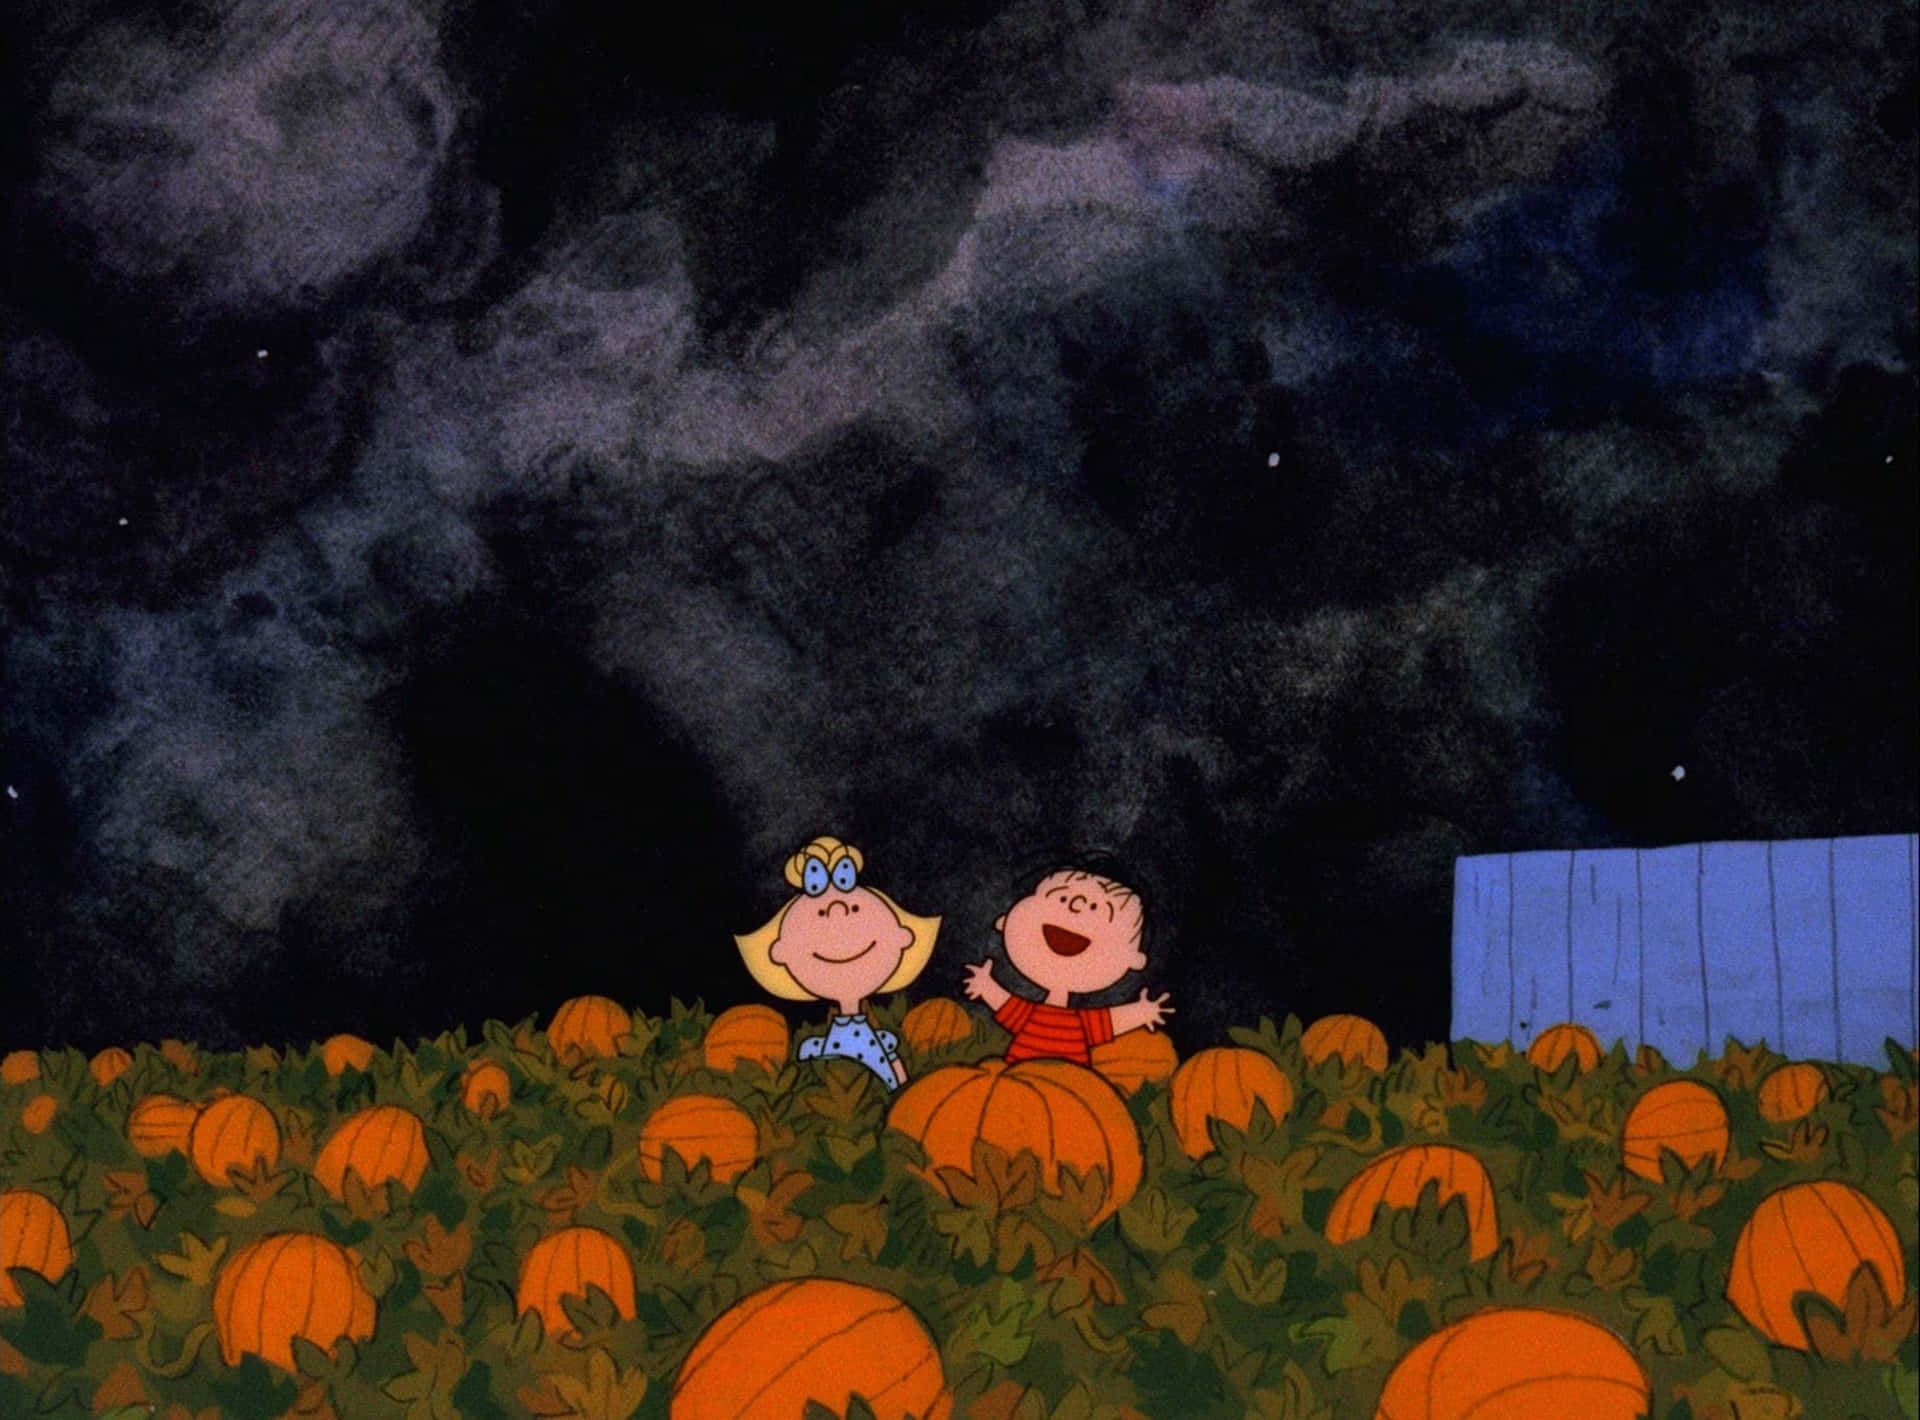 Aesthetic Halloween Background Pumpkin Patch Peanuts Characters Background